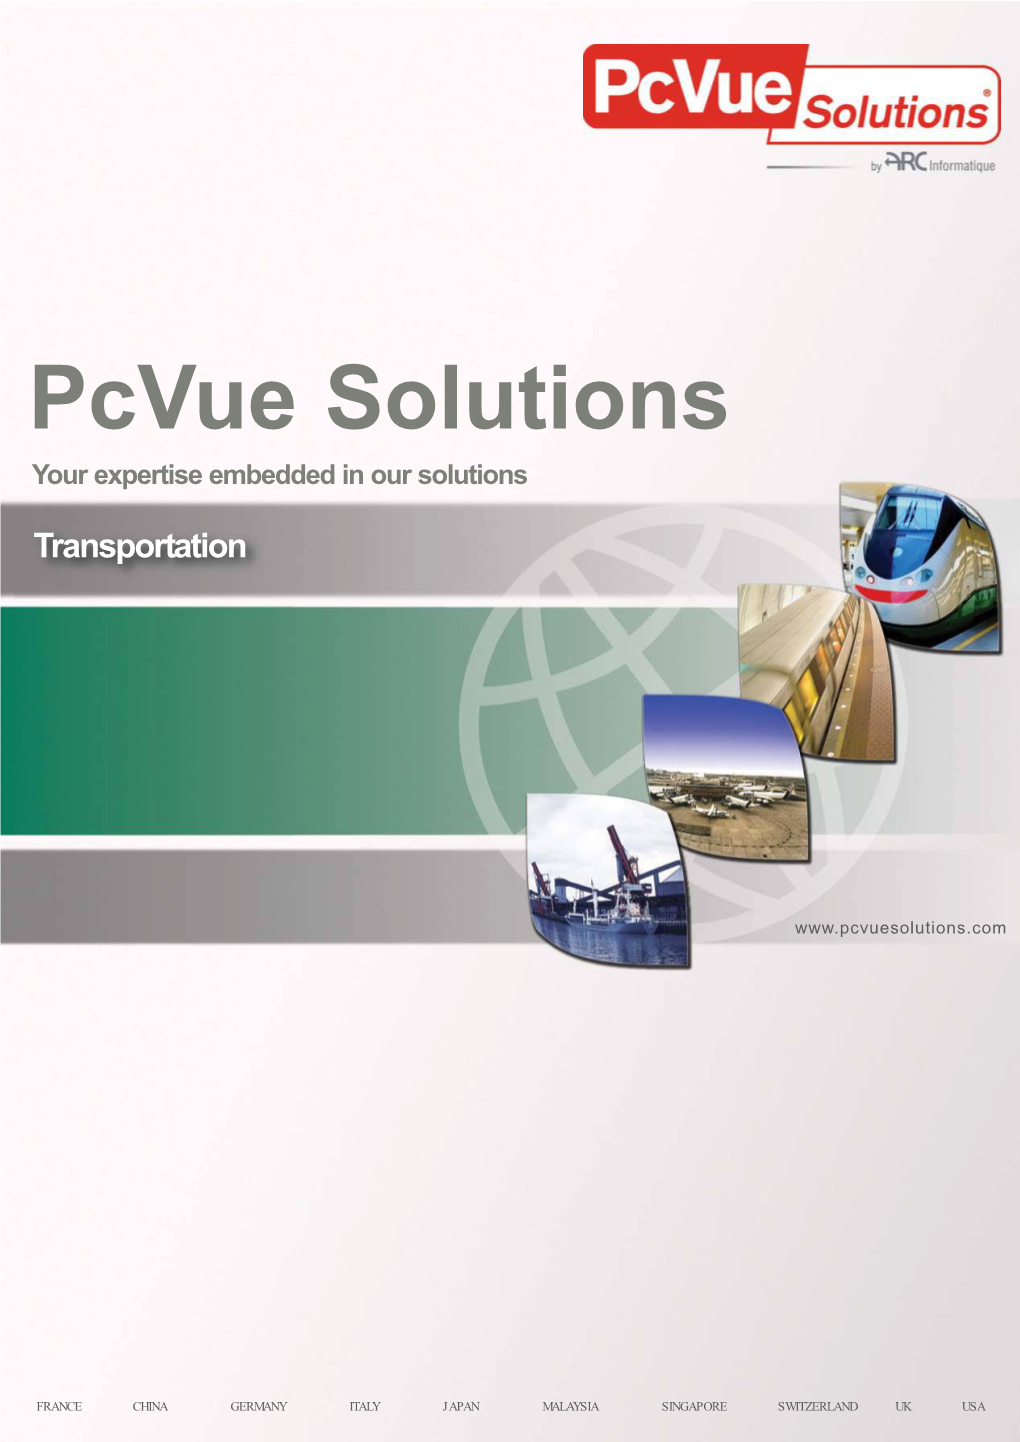 Pcvue Solutions Your Expertise Embedded in Our Solutions